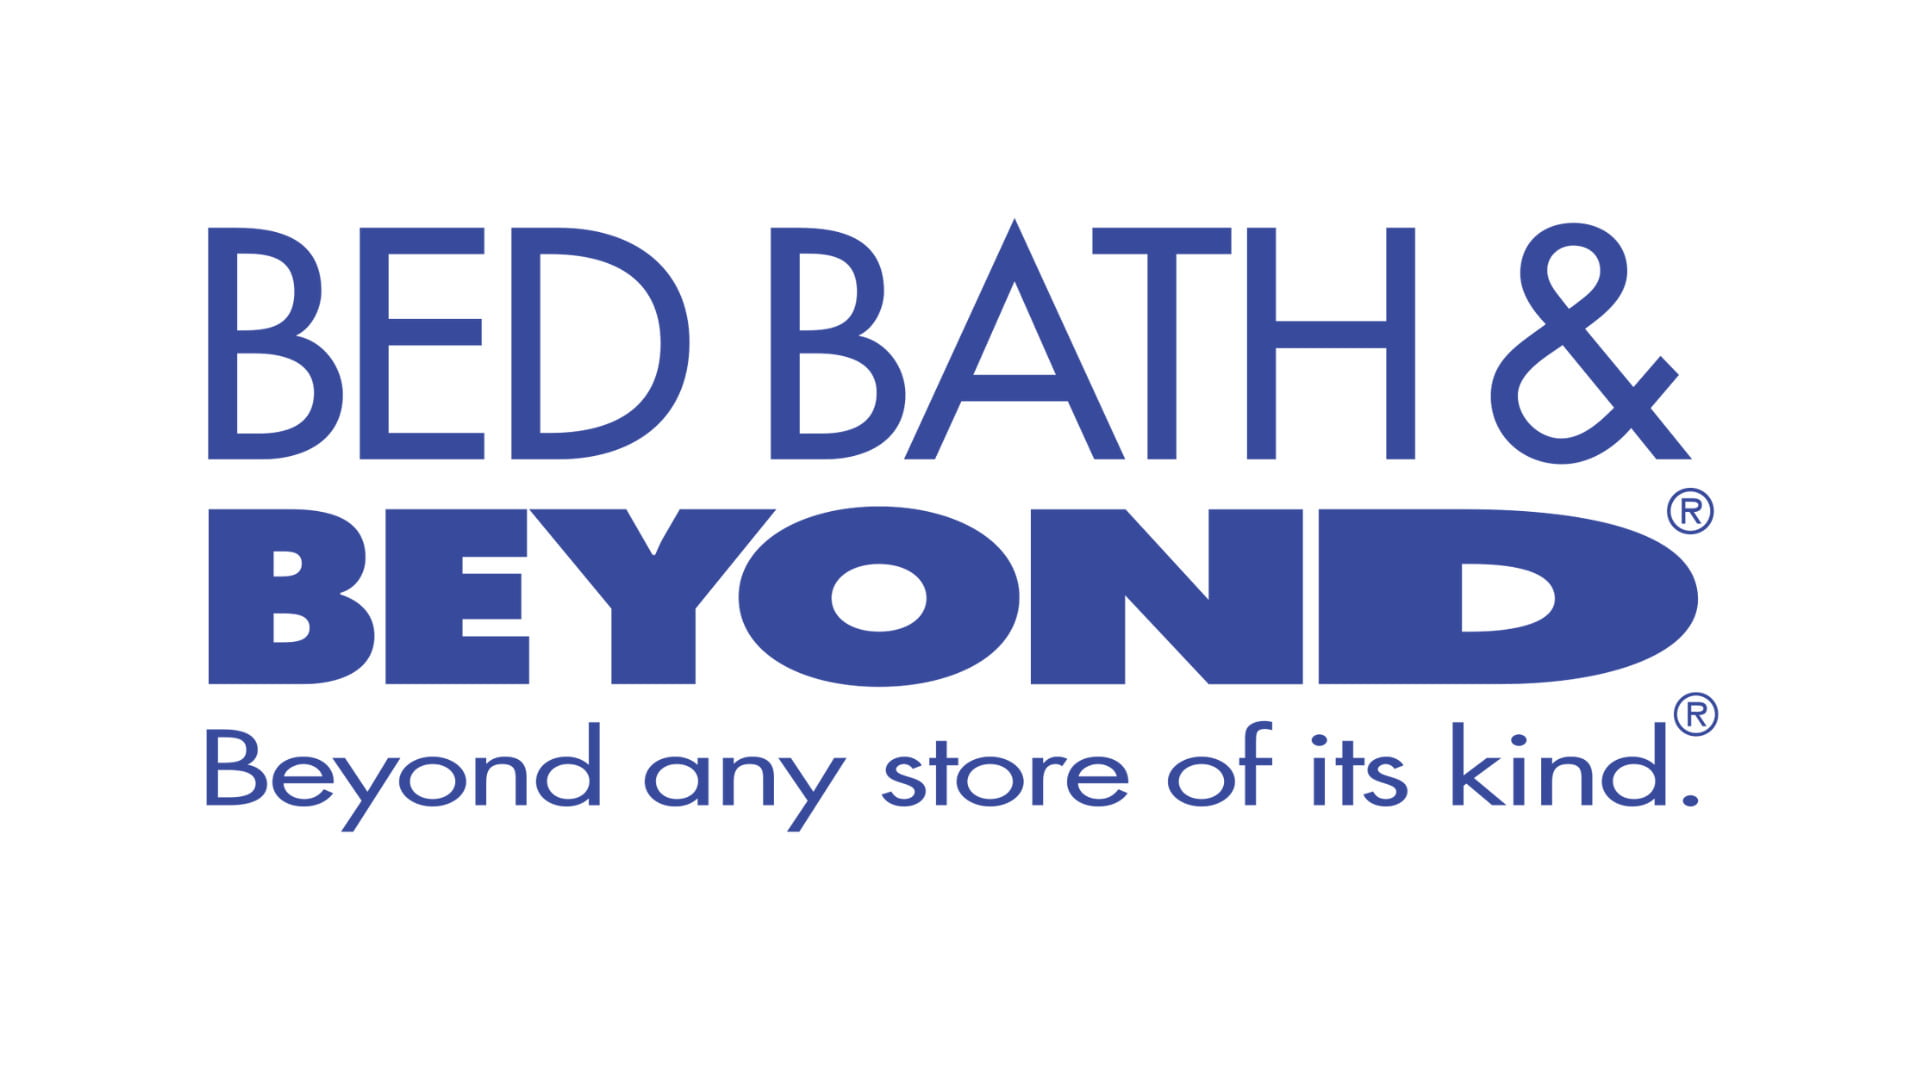 Bed Bath and Beyond Coupon Codes